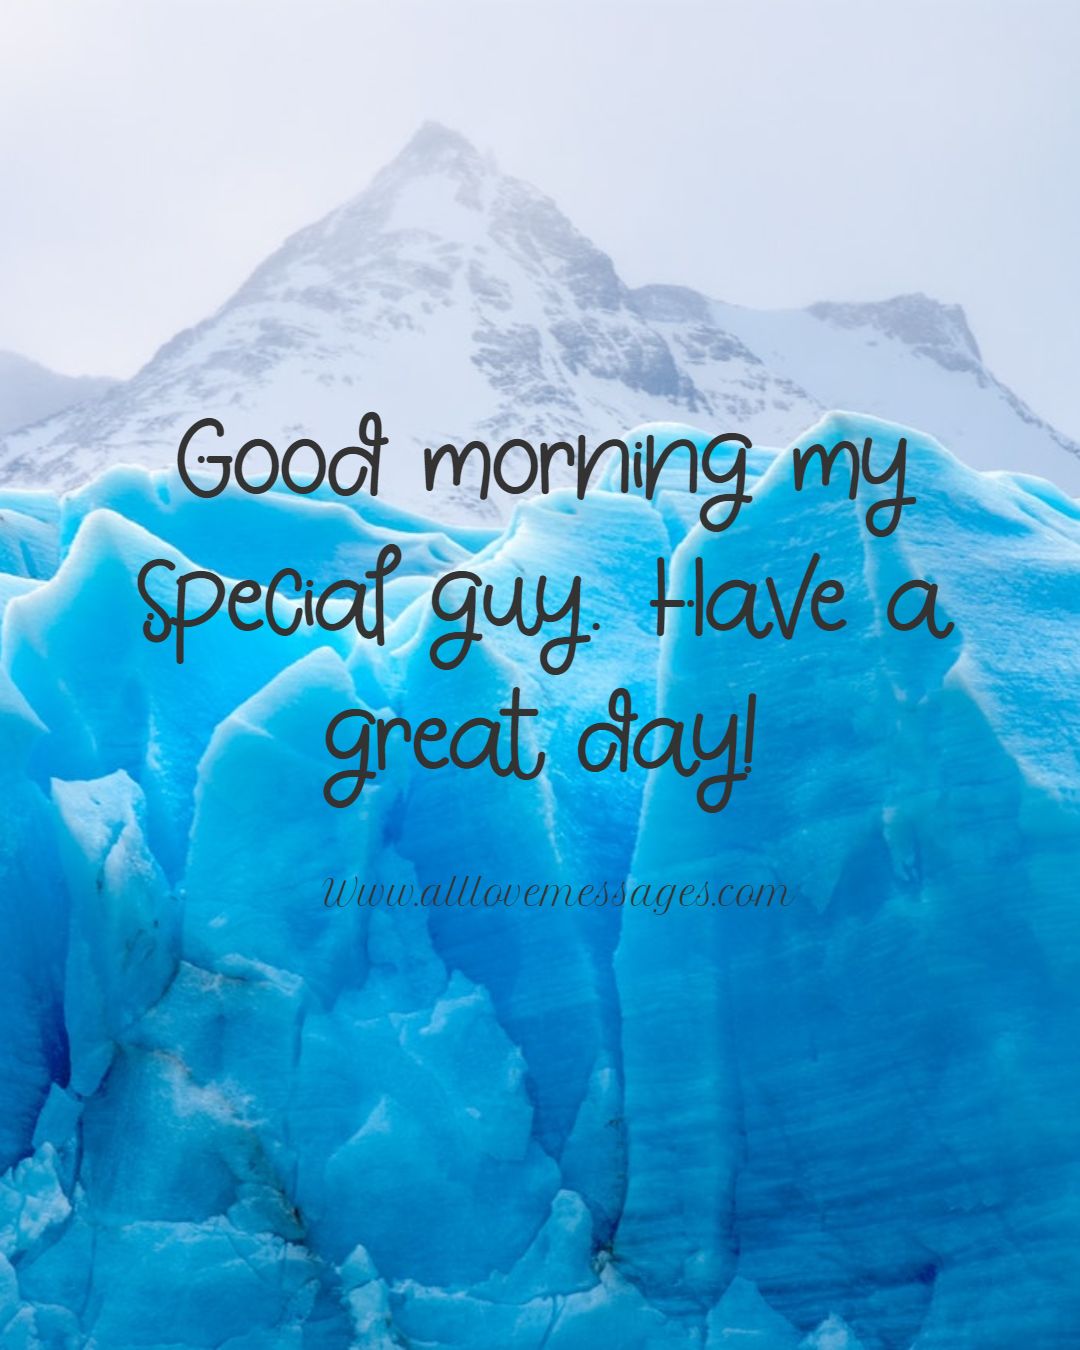 87 Cute Good Morning Love Messages for Him